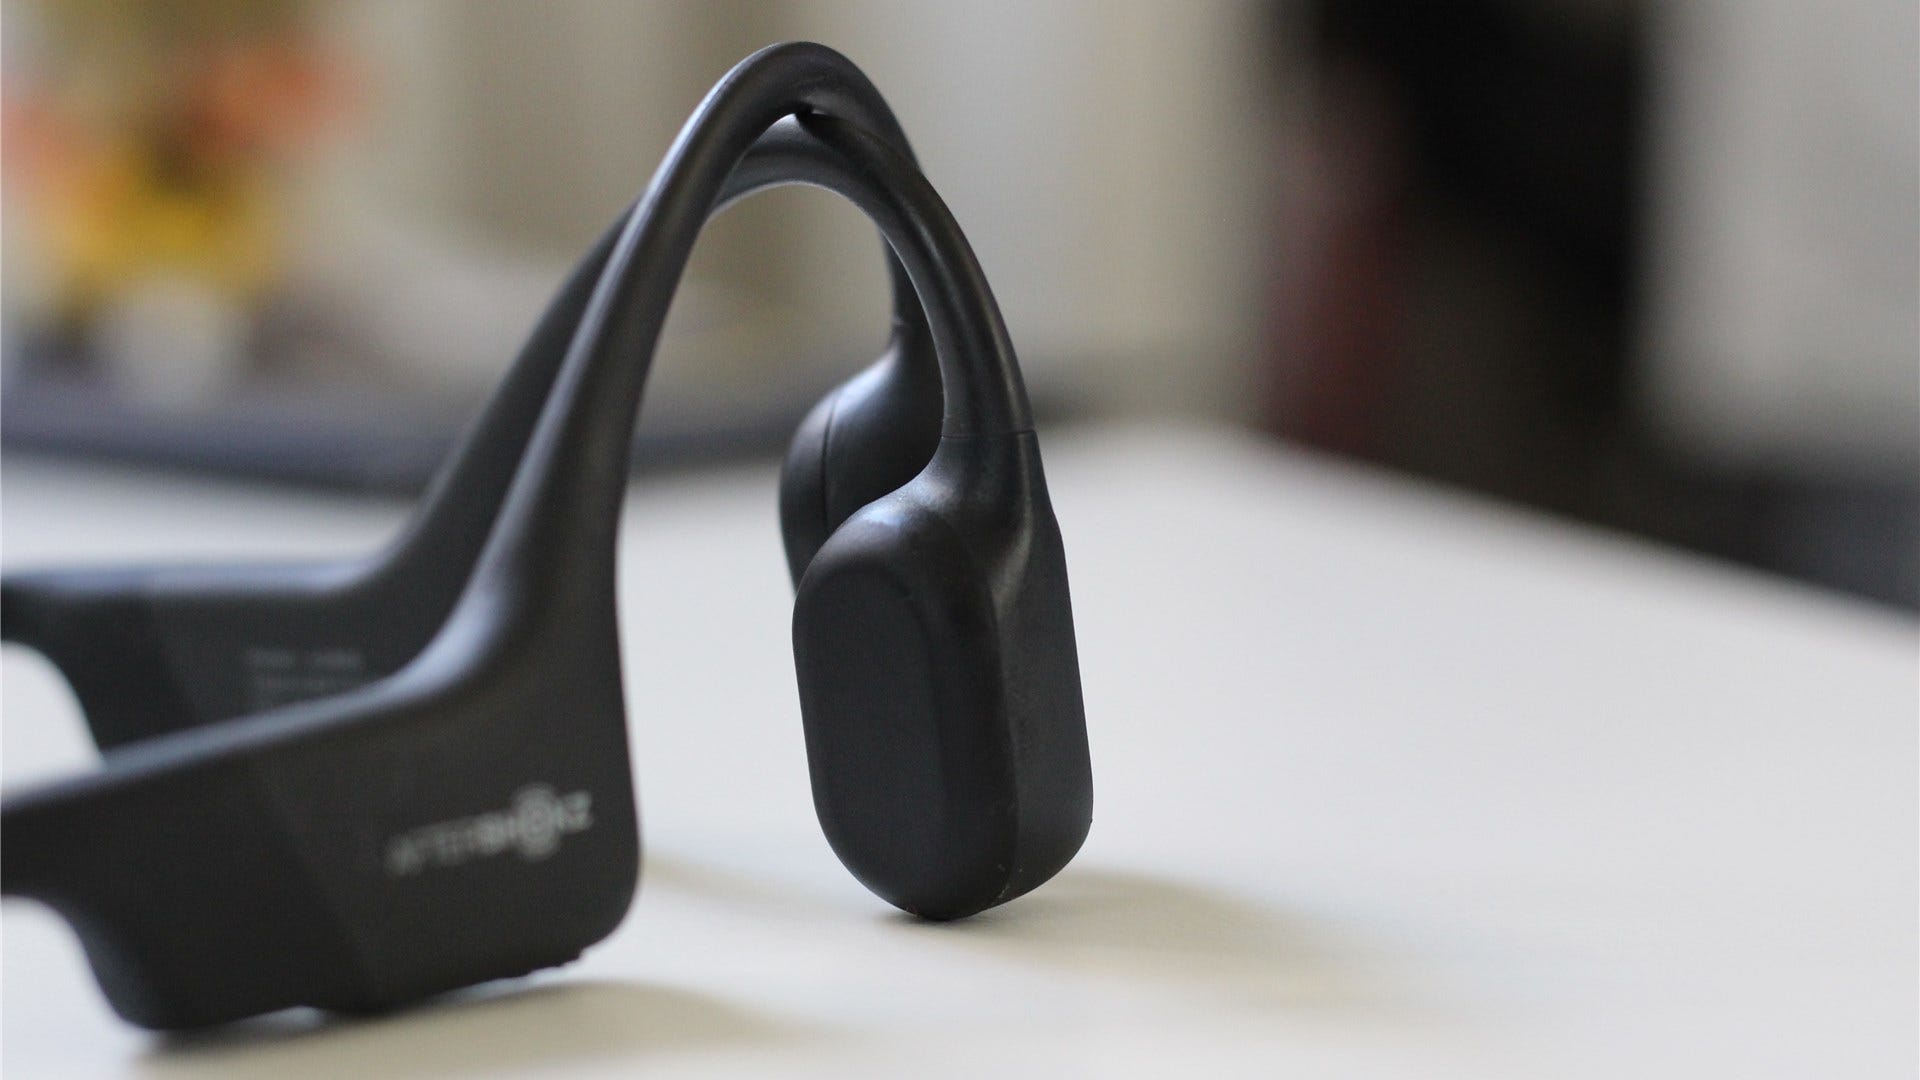 A pair of AfterShokz bone conduction headphones on a table.